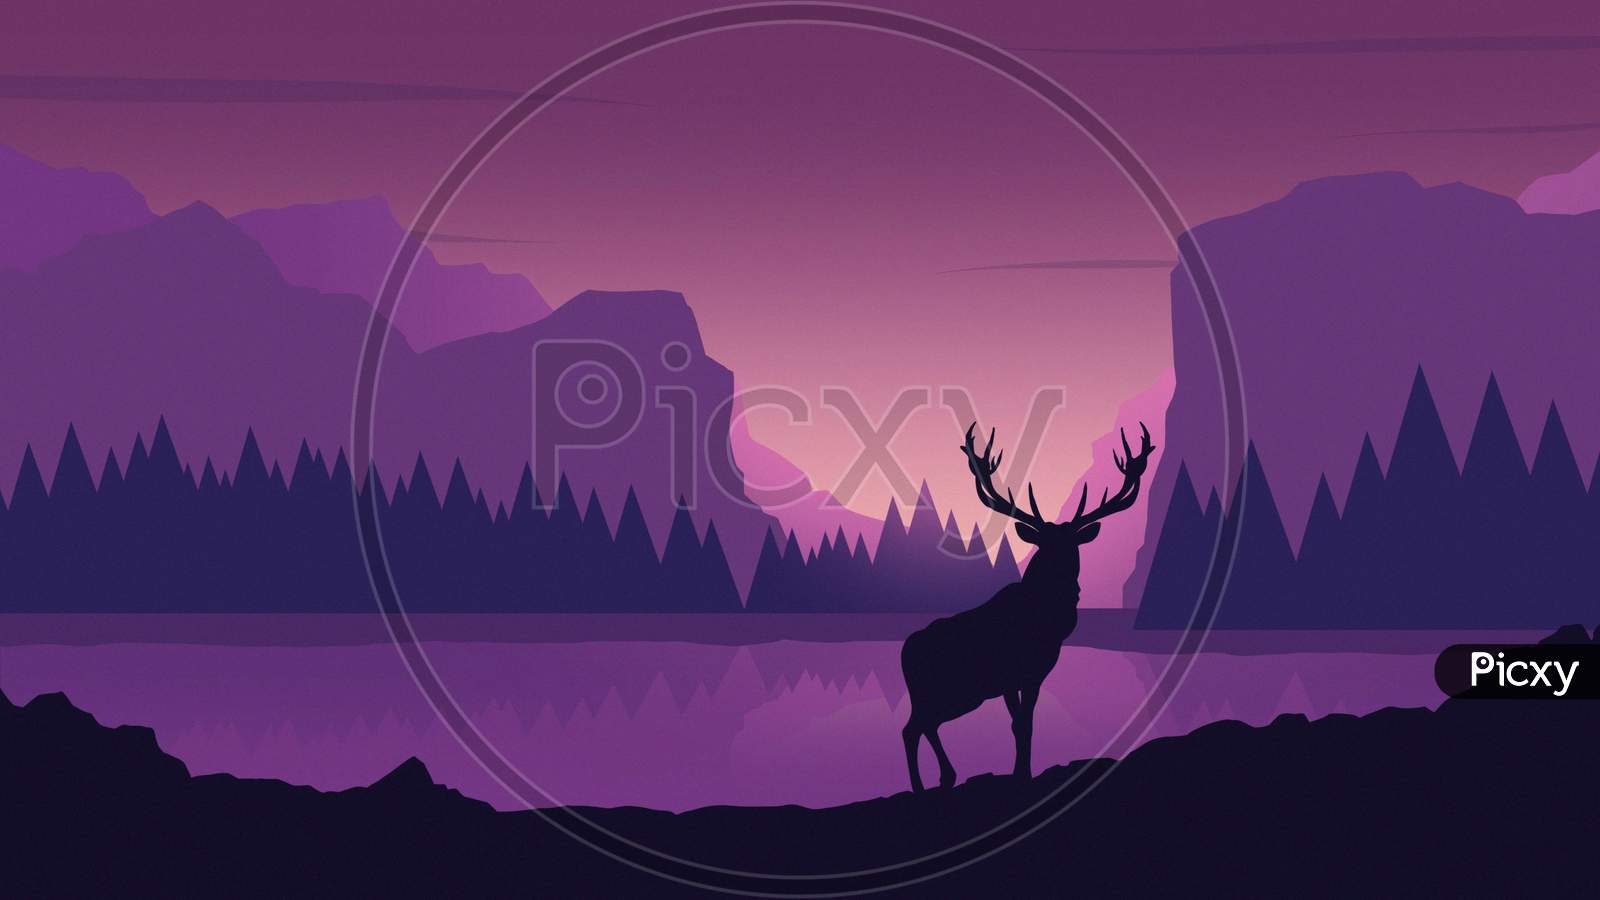 Abstract Landscape Illustration Of An Rain Deer In Jungle With Purple And Black Texture.